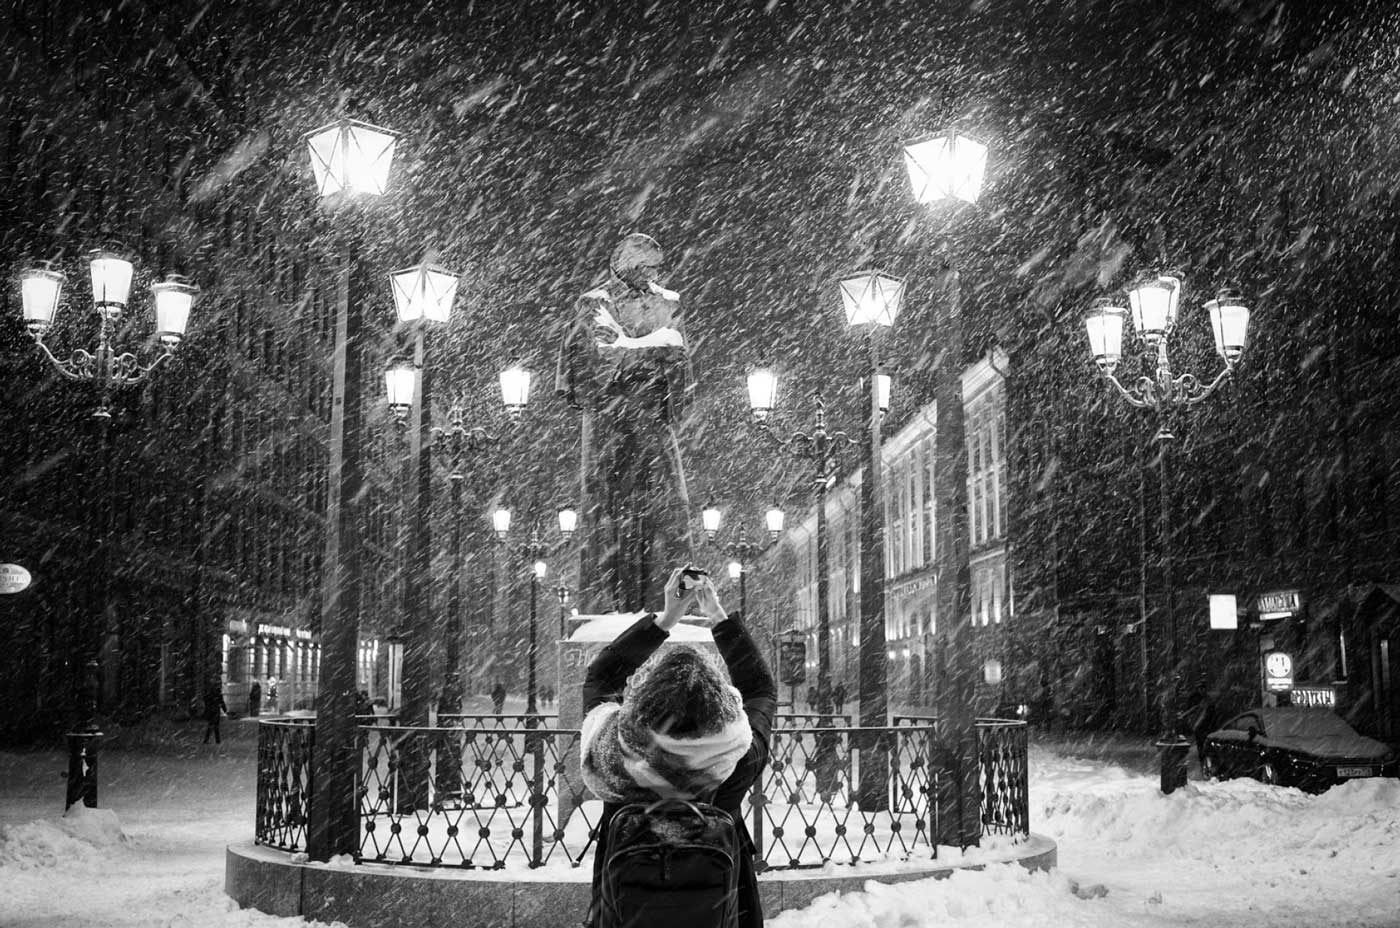 Woman photographing a statue at night in a snow storm